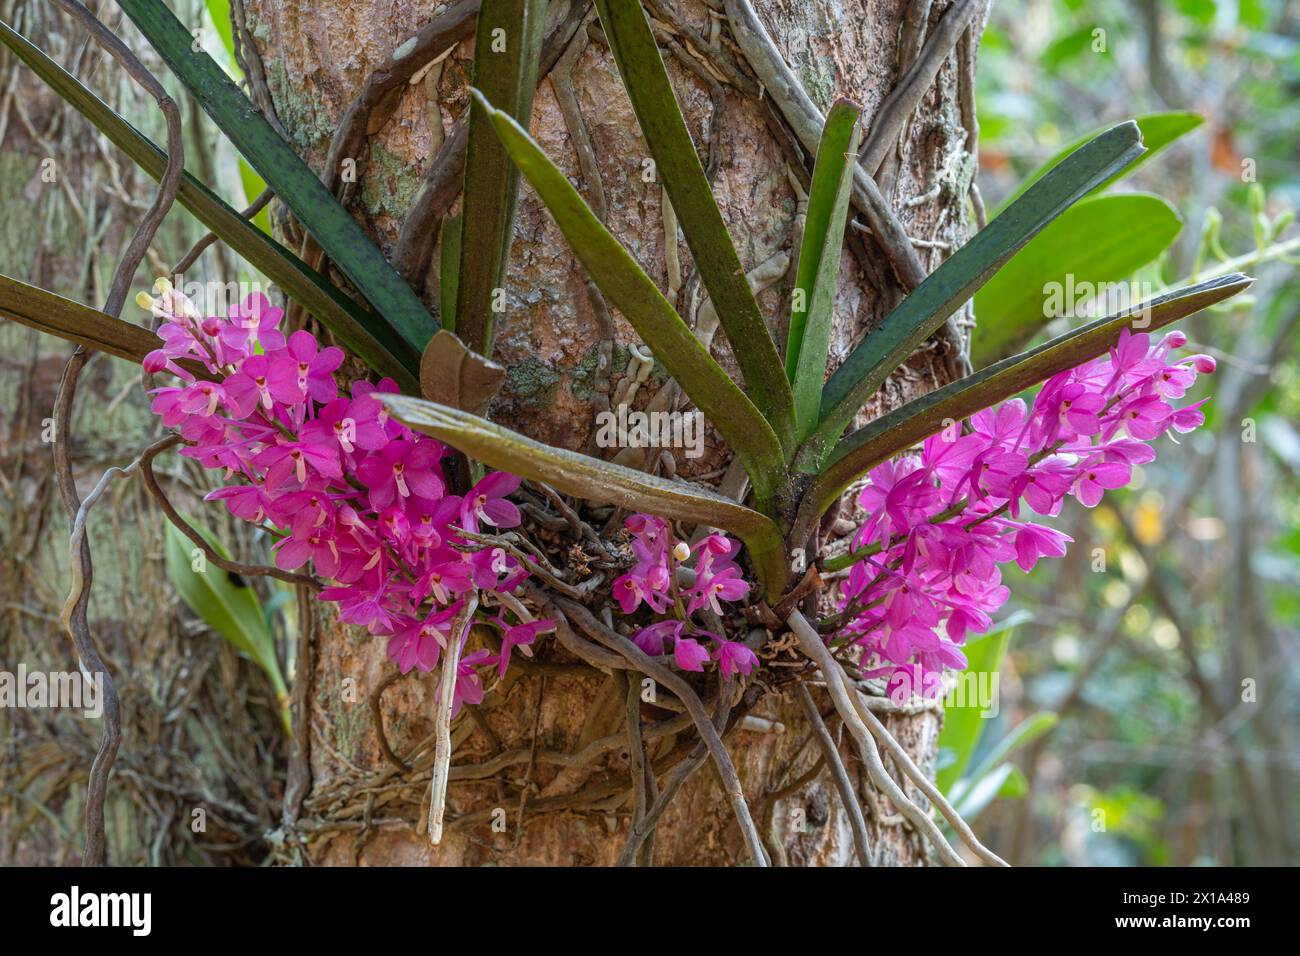 Closeup view of purple pink flowers of ascocentrum ampullaceum epiphytic orchid species blooming outdoors in tropical garden Stock Photo